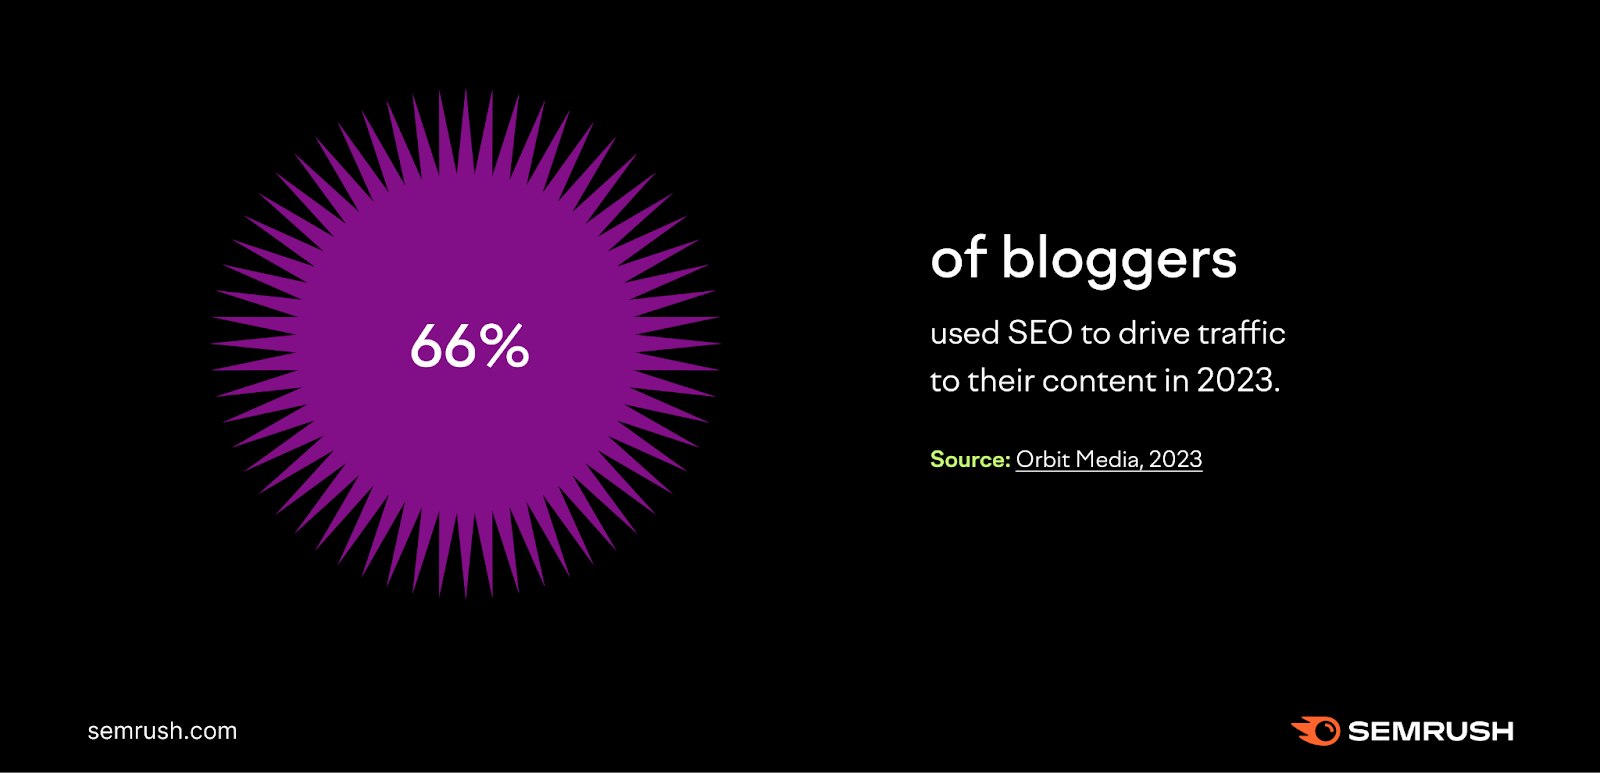 66% of bloggers used SEO to drive traffic to their content in 2023.